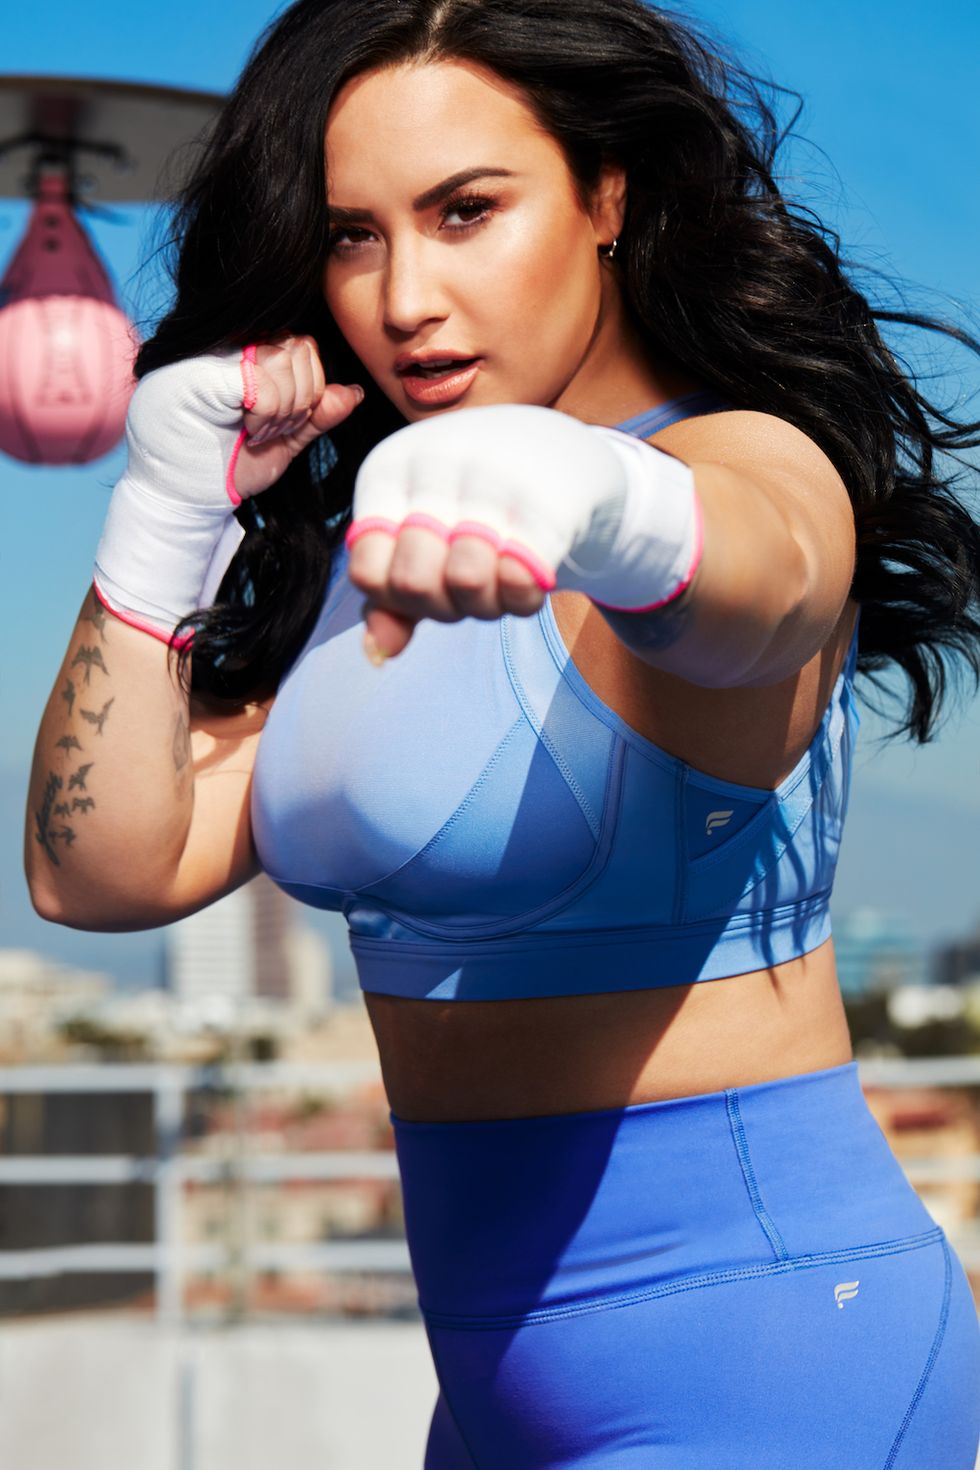 Demi Lovato - Check Out My New Activewear Collection By Fabletics